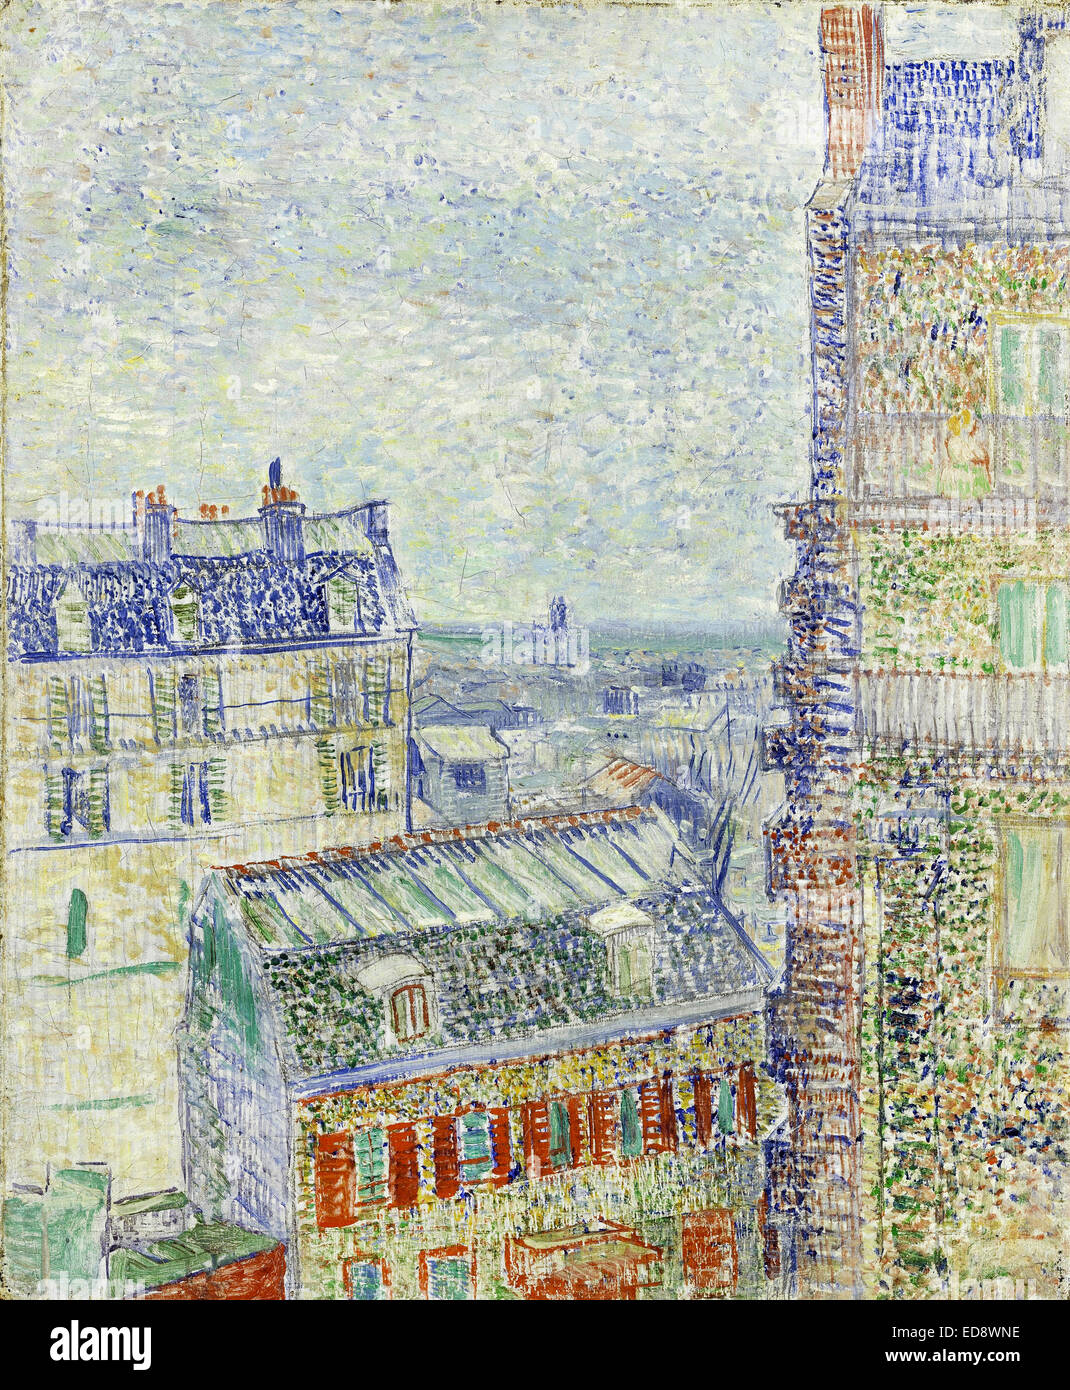 Vincent van Gogh, View of Paris from Vincent's Room in the Rue Lepic. 1887 Oil on canvas. Van Gogh Museum, Amsterdam. Stock Photo